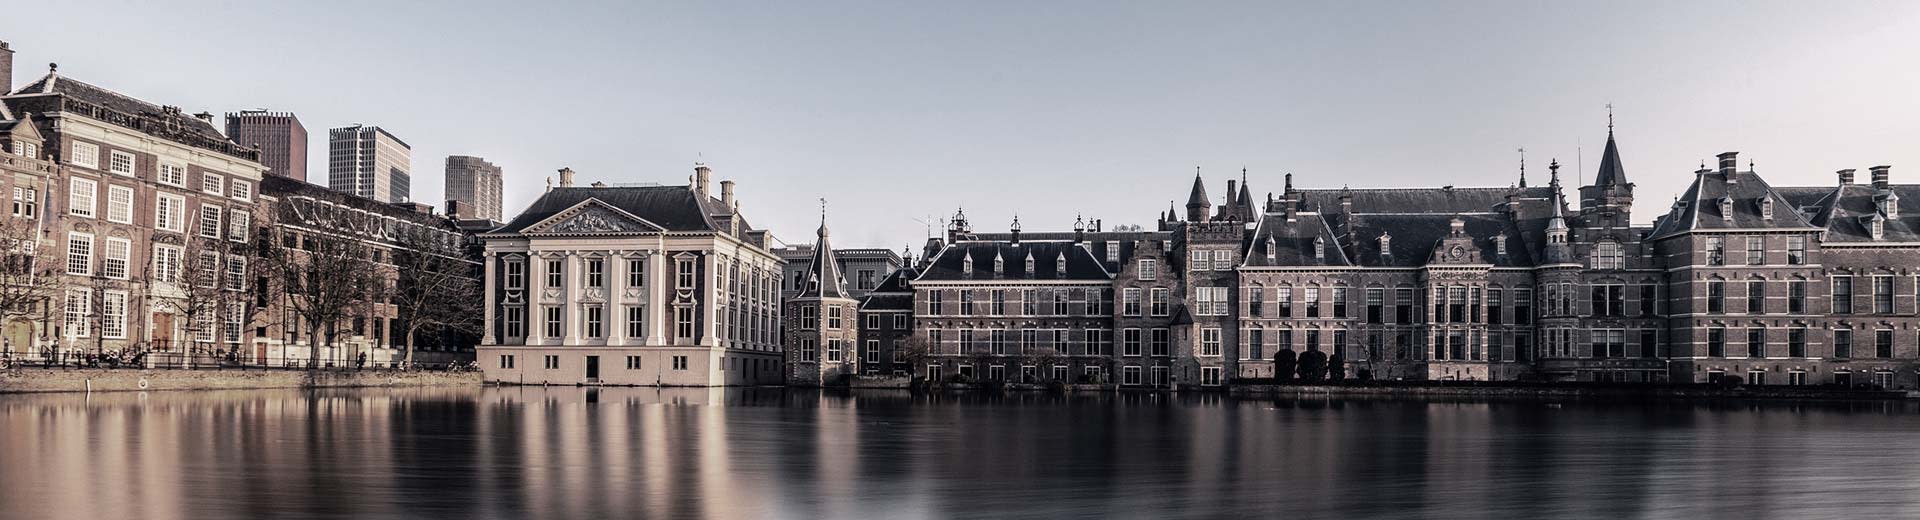 Behind a body of water in The Hague are an assortment of beautiful, historic buildings under a clear and bright sky.